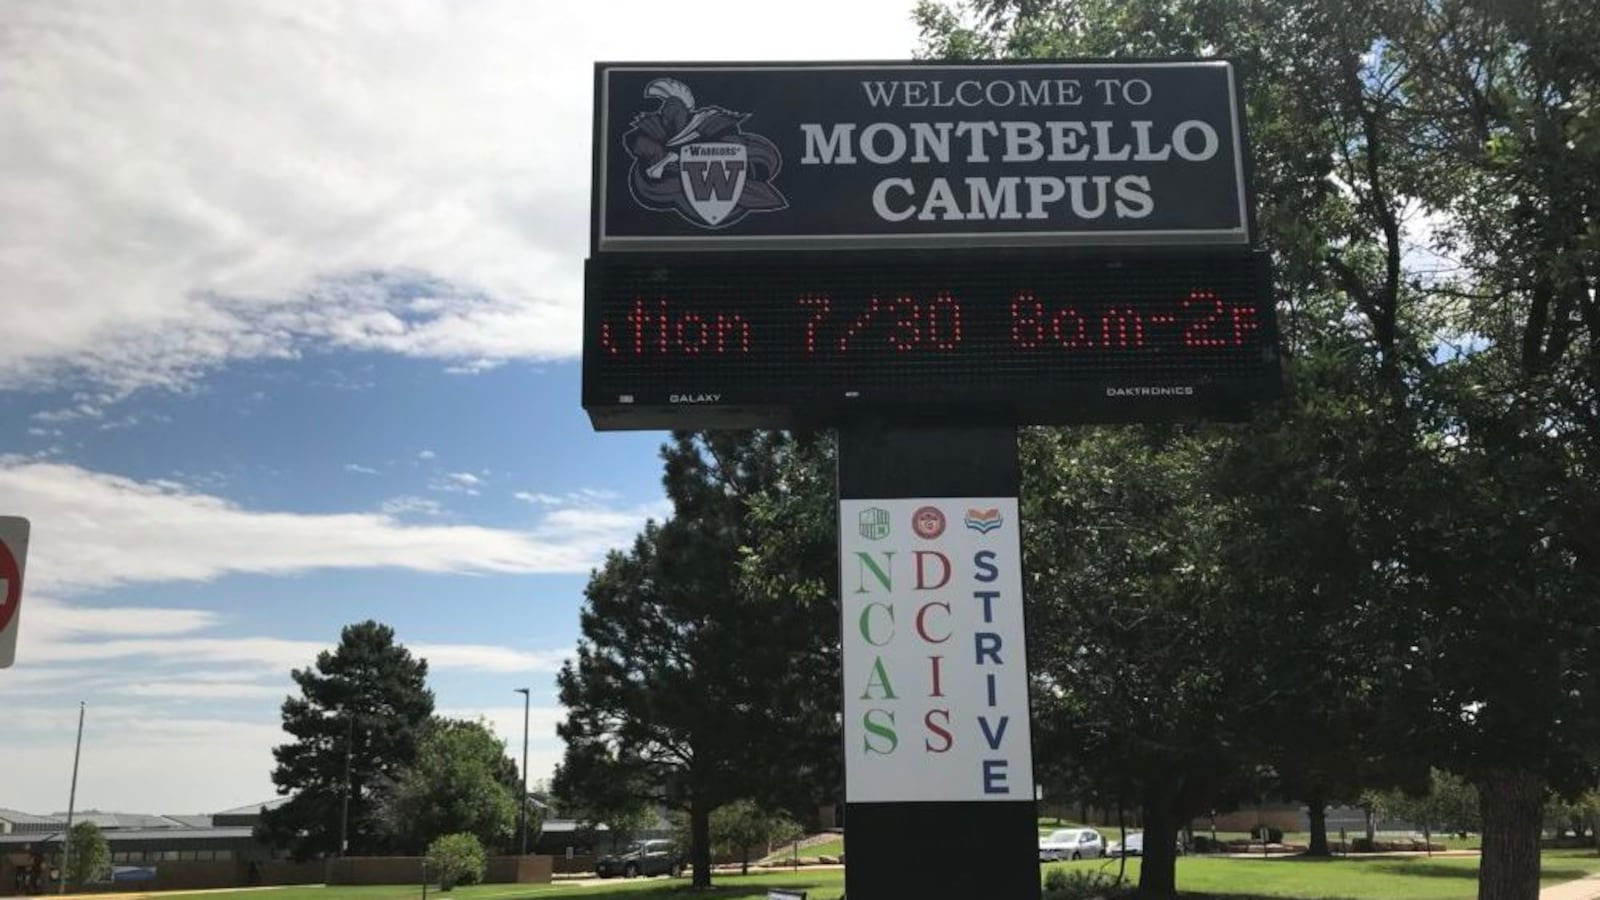 The Montbello campus, once a comprehensive high school, is now shared by several schools.